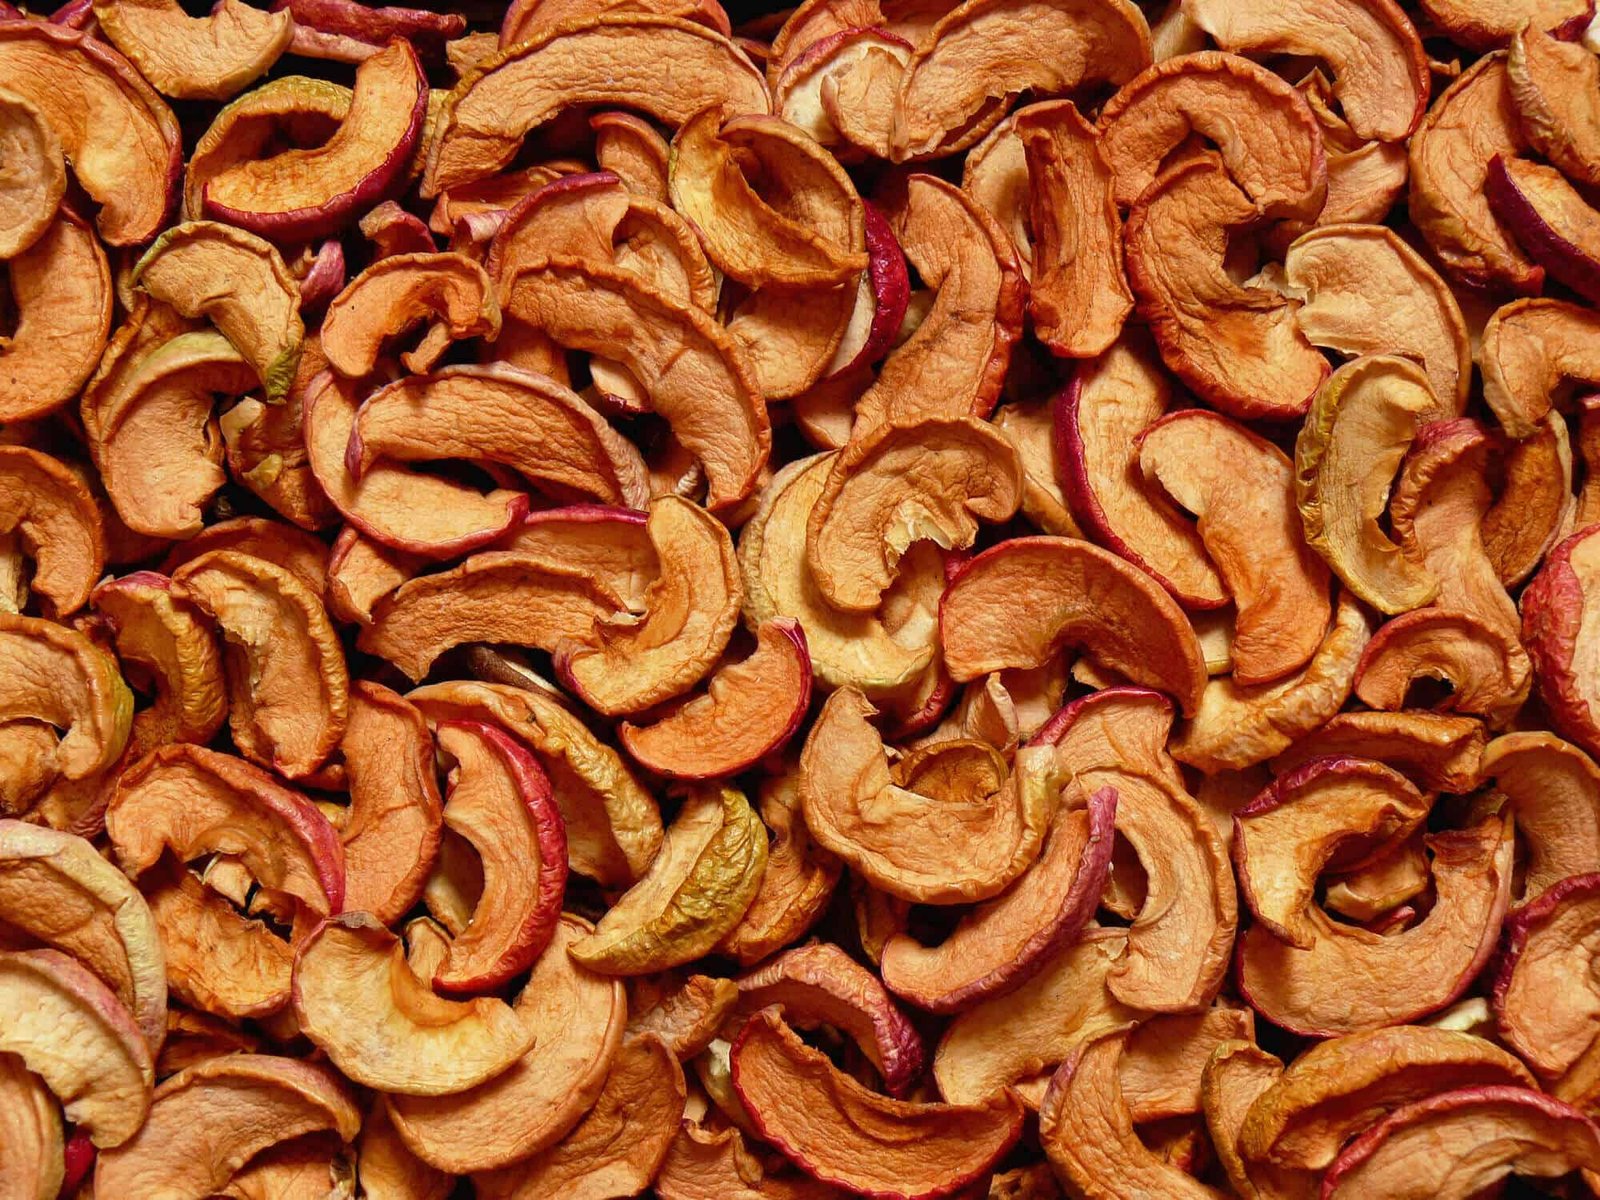 lots of dehydrated sliced red apple slices overlapping